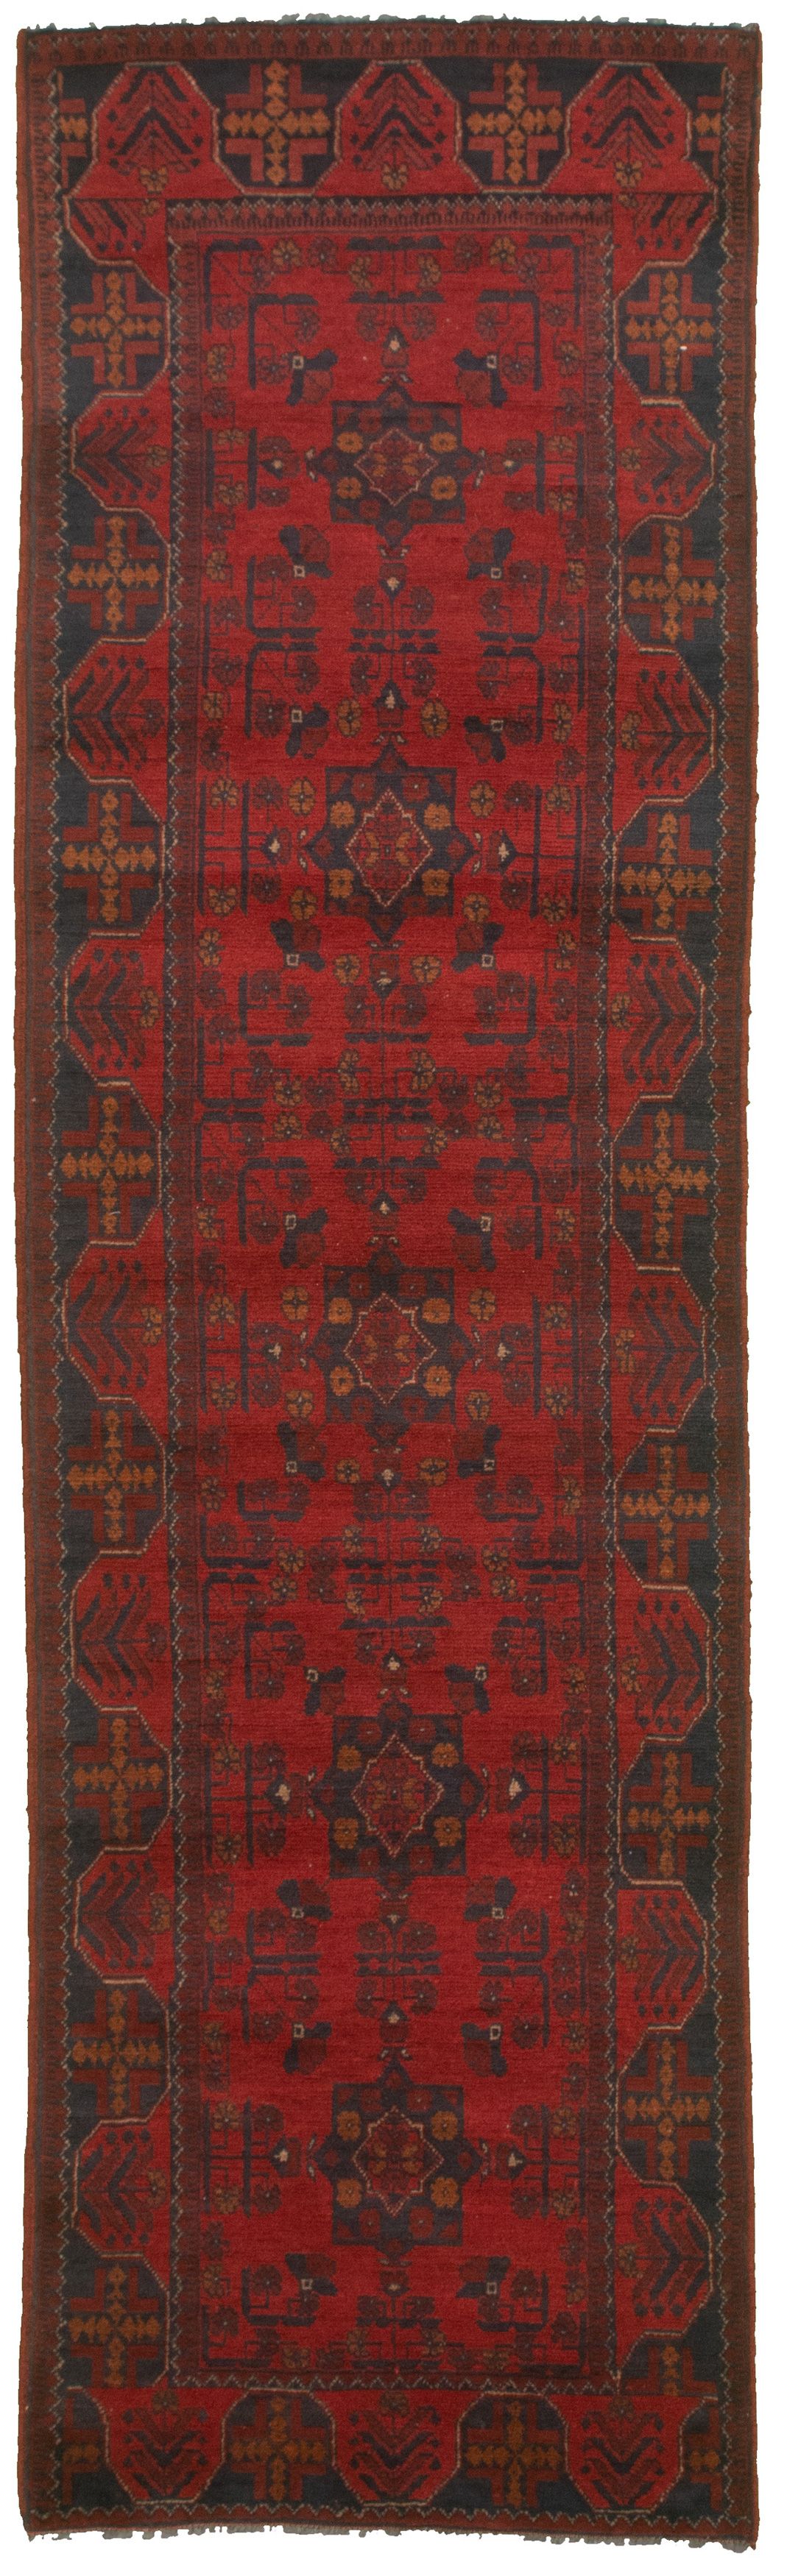 Hand-knotted Finest Khal Mohammadi Red  Rug 2'8" x 9'7" Size: 2'8" x 9'7"  